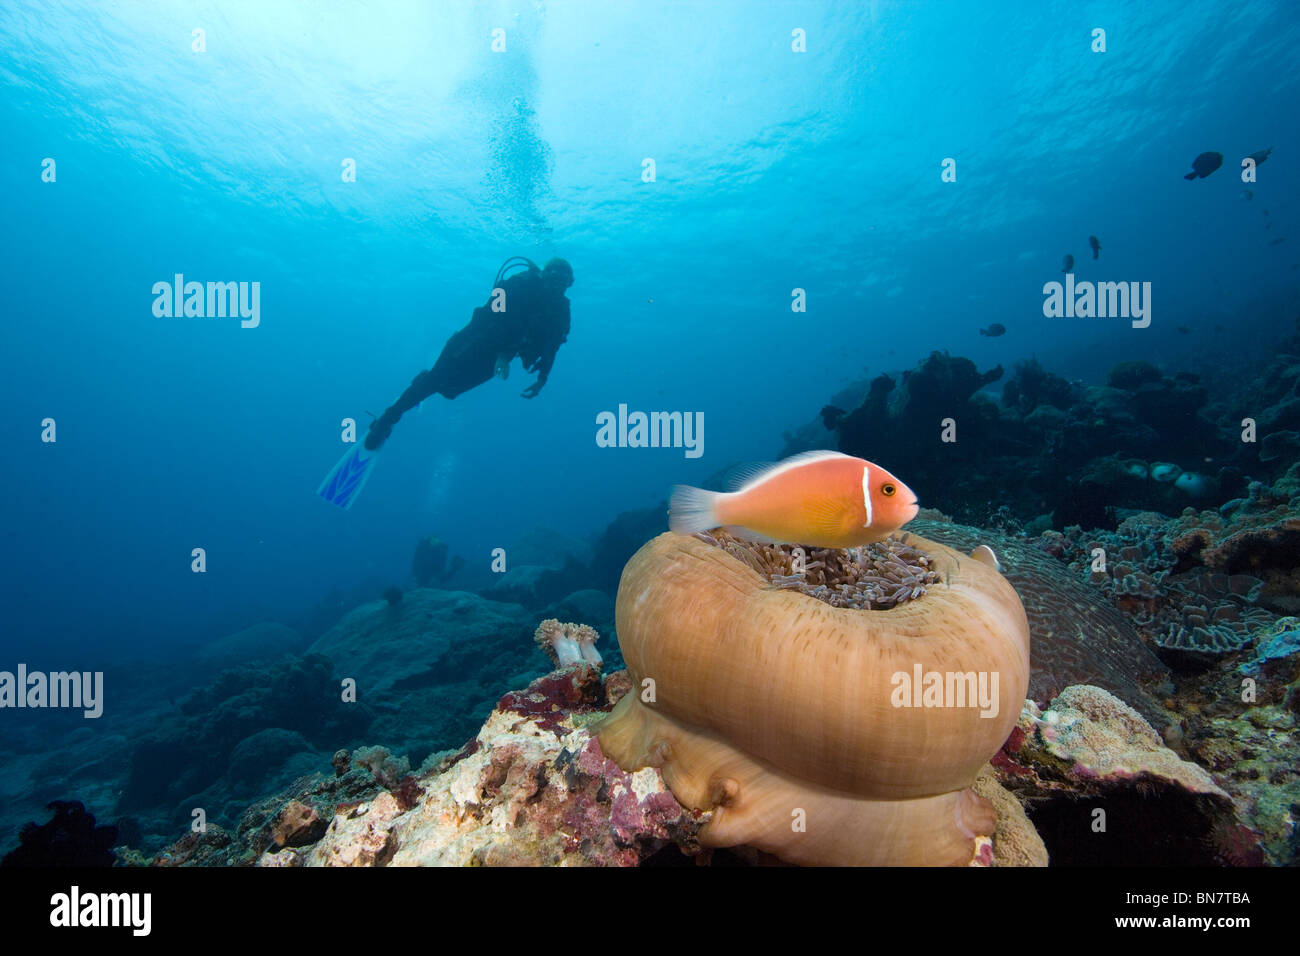 Pink anemonefish (Amphiprion perideraion) lingers over a Magnificent anemone (Heteractis magnifica) in Indonesia Stock Photo